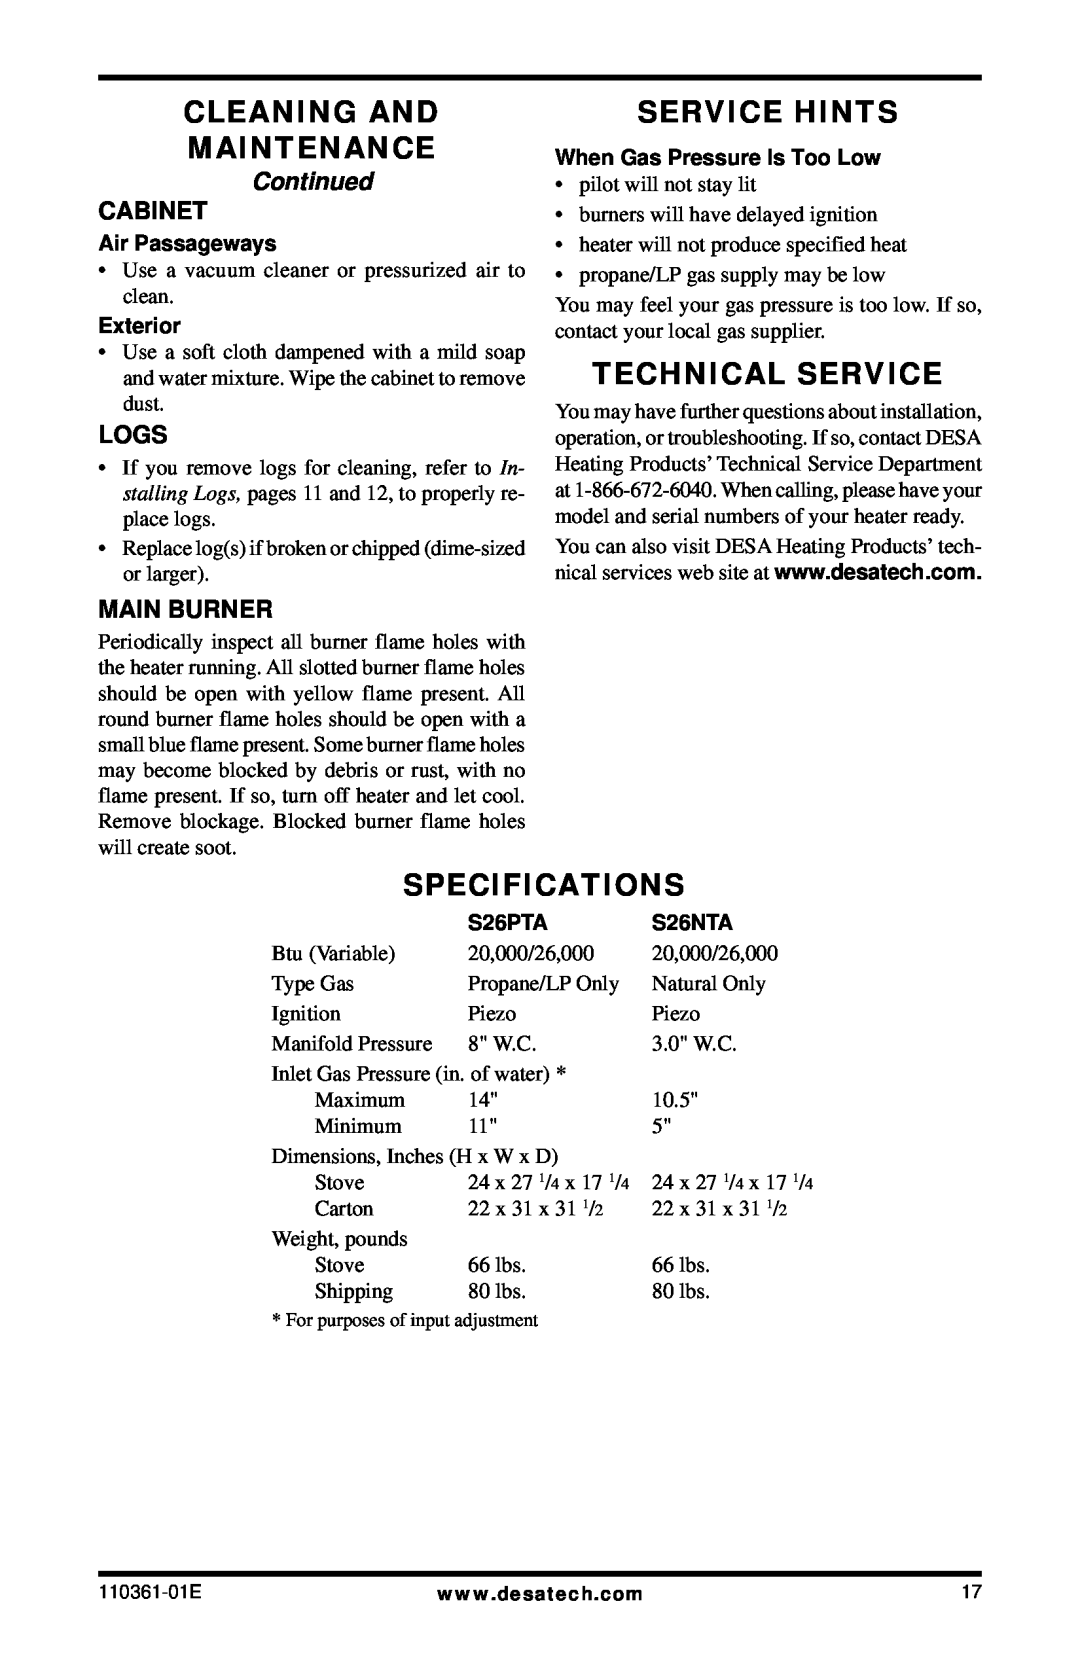 Desa Tech S26PTA Cleaning And Maintenance, Service Hints, Technical Service, Specifications, Continued, Cabinet, Logs 